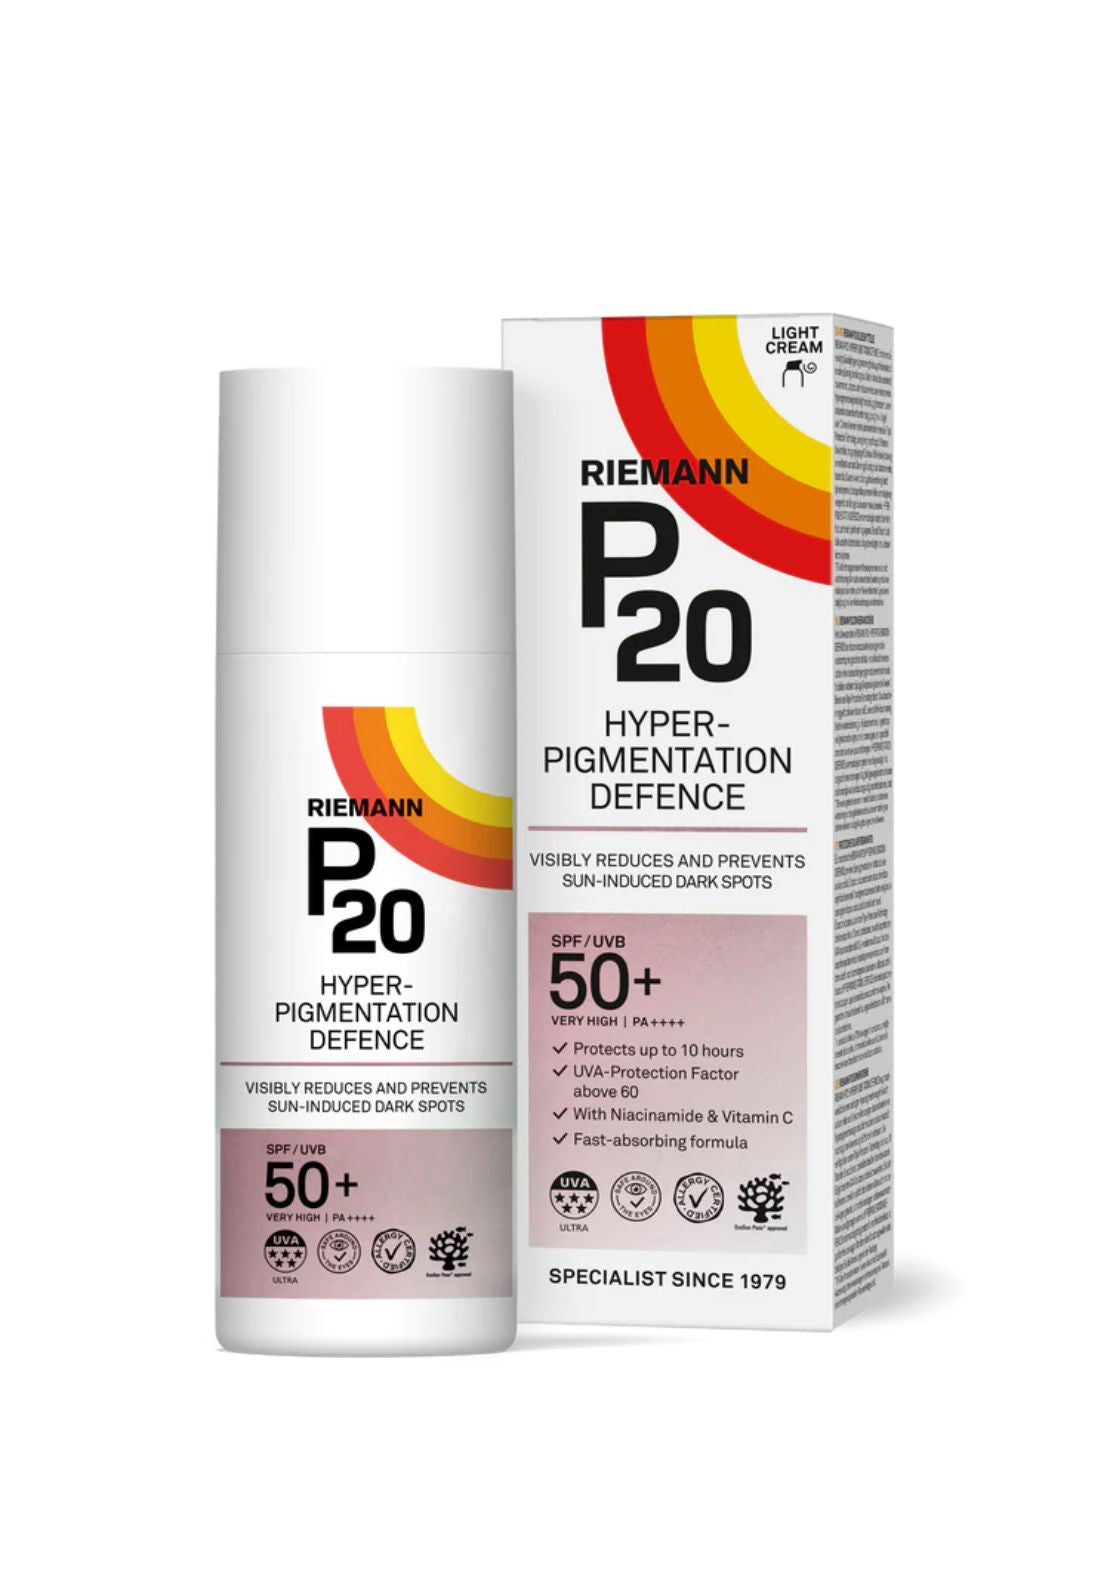 P20 Hyperpigmentation Defence SPF50 1 Shaws Department Stores